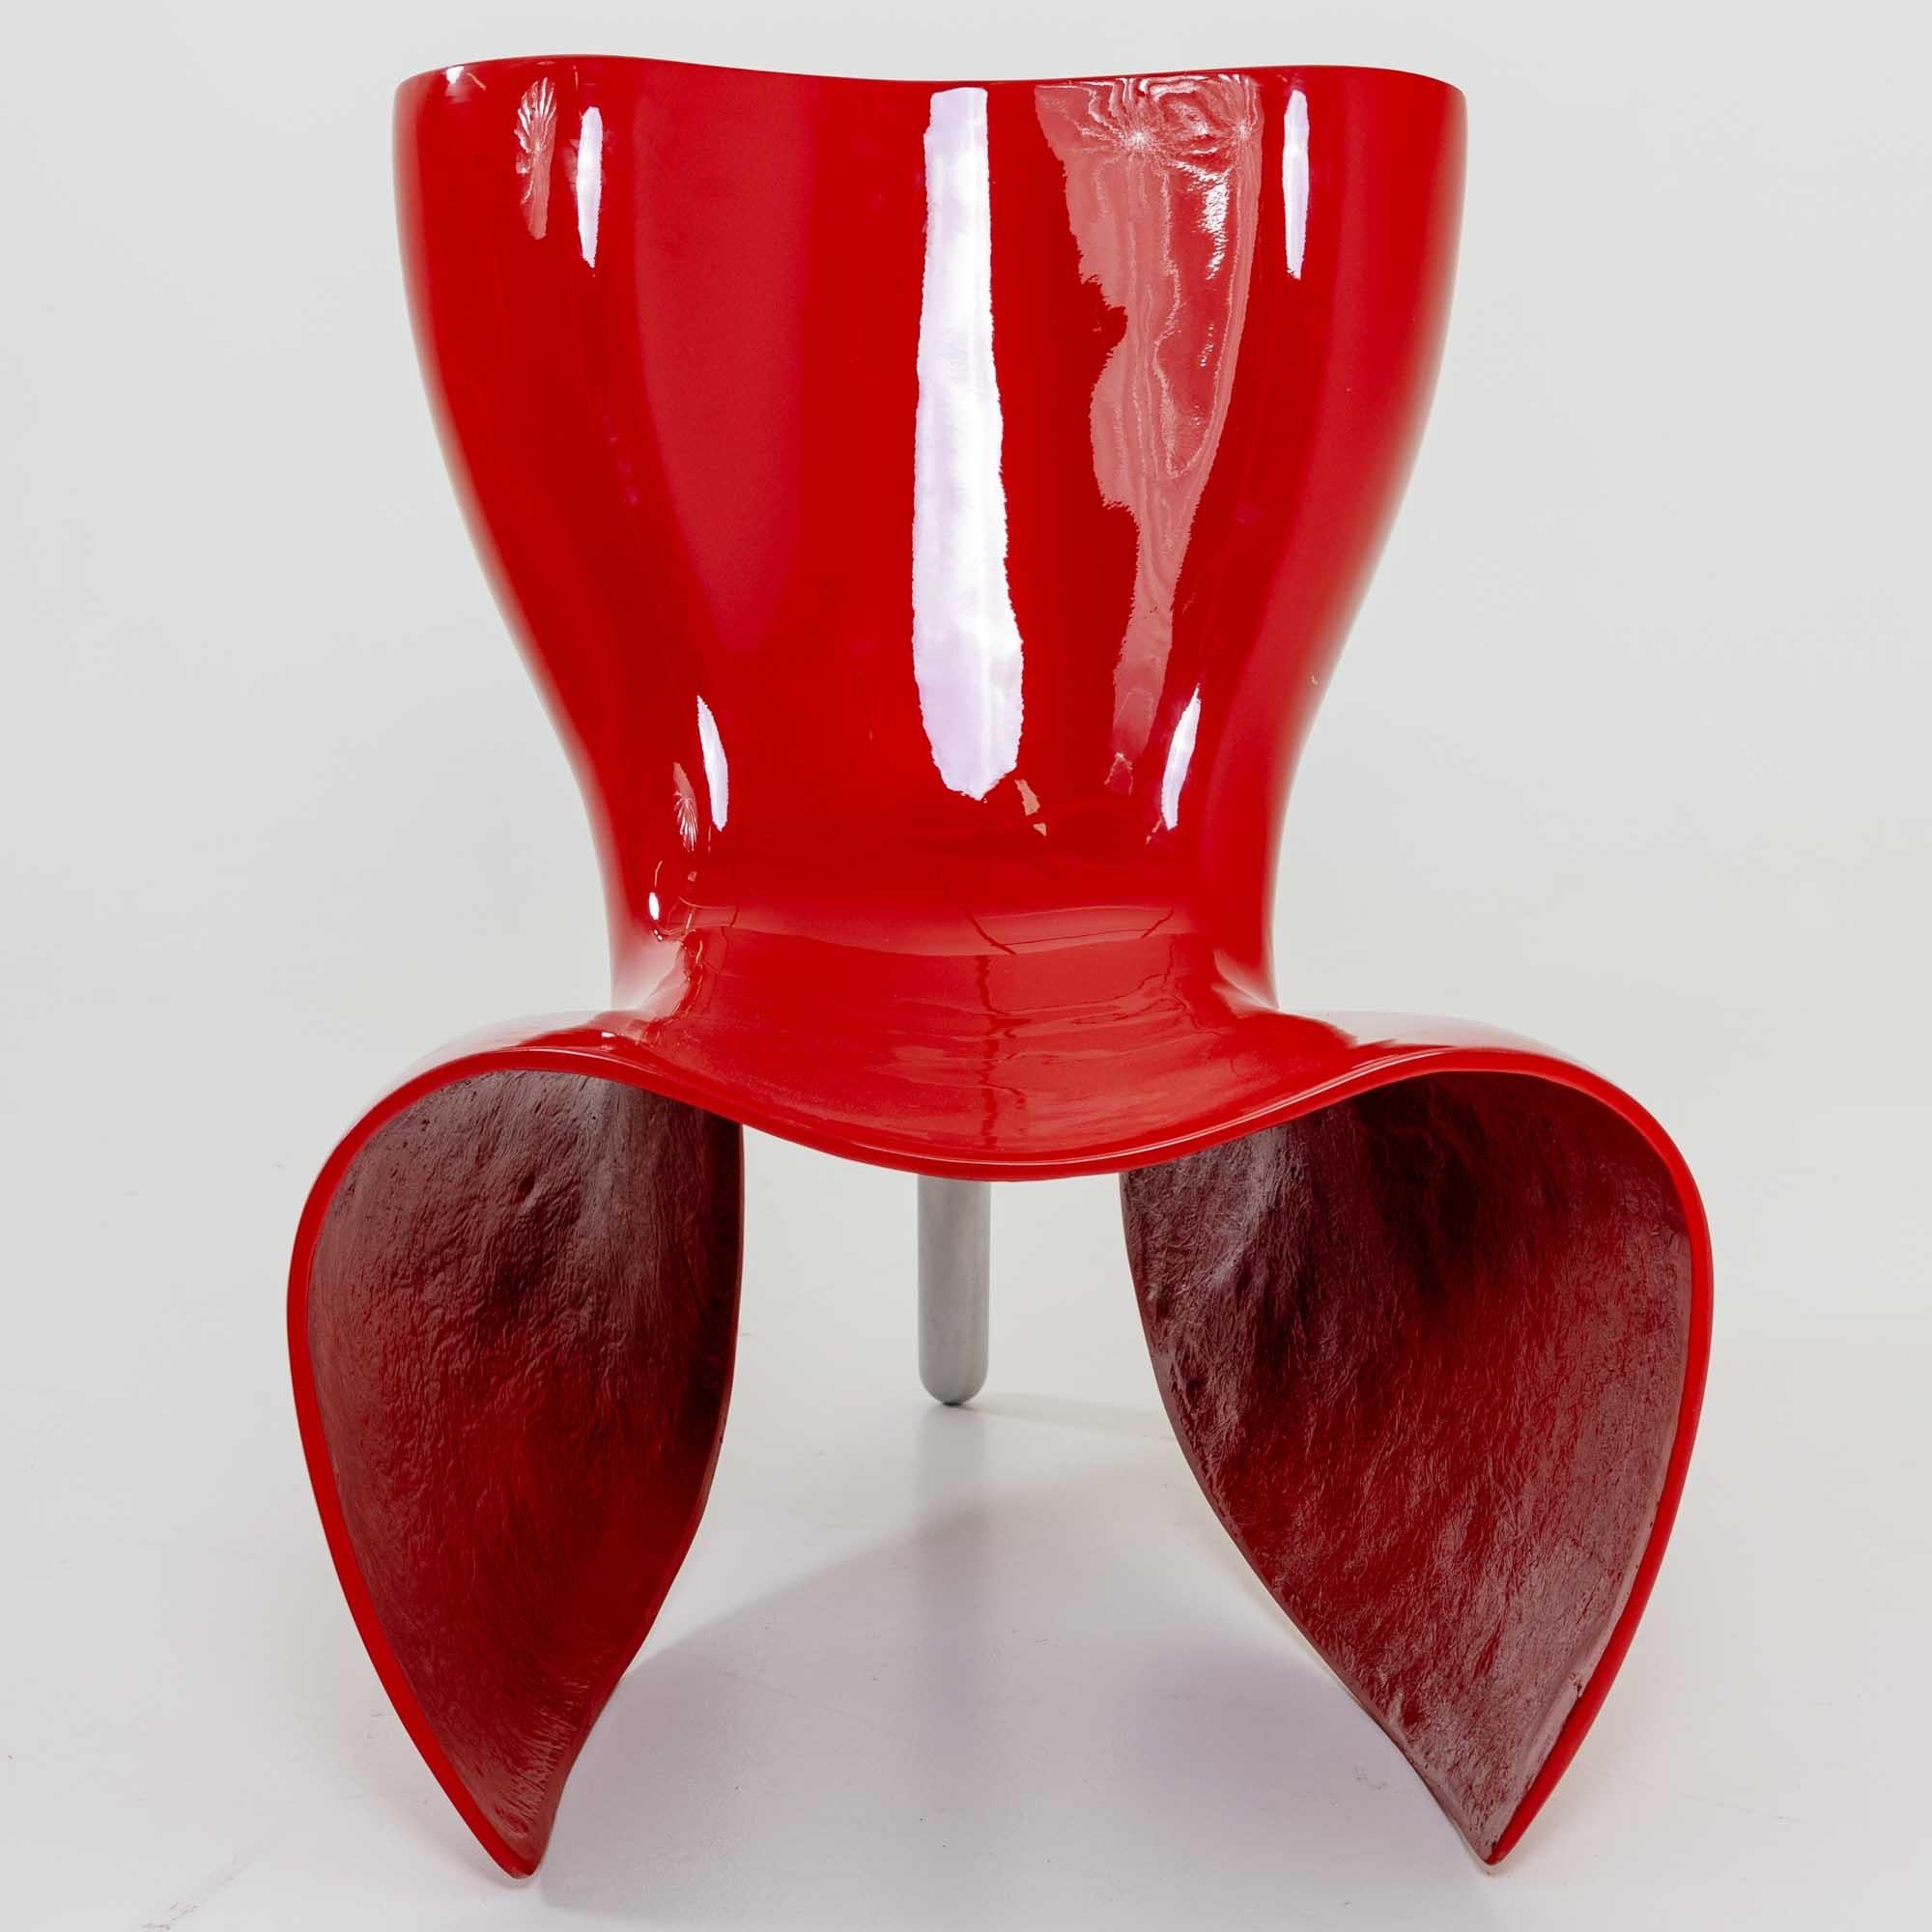 Felt Chair by Marc Newson for Cappellini, Italy designed in 1993 In Good Condition For Sale In New York, NY